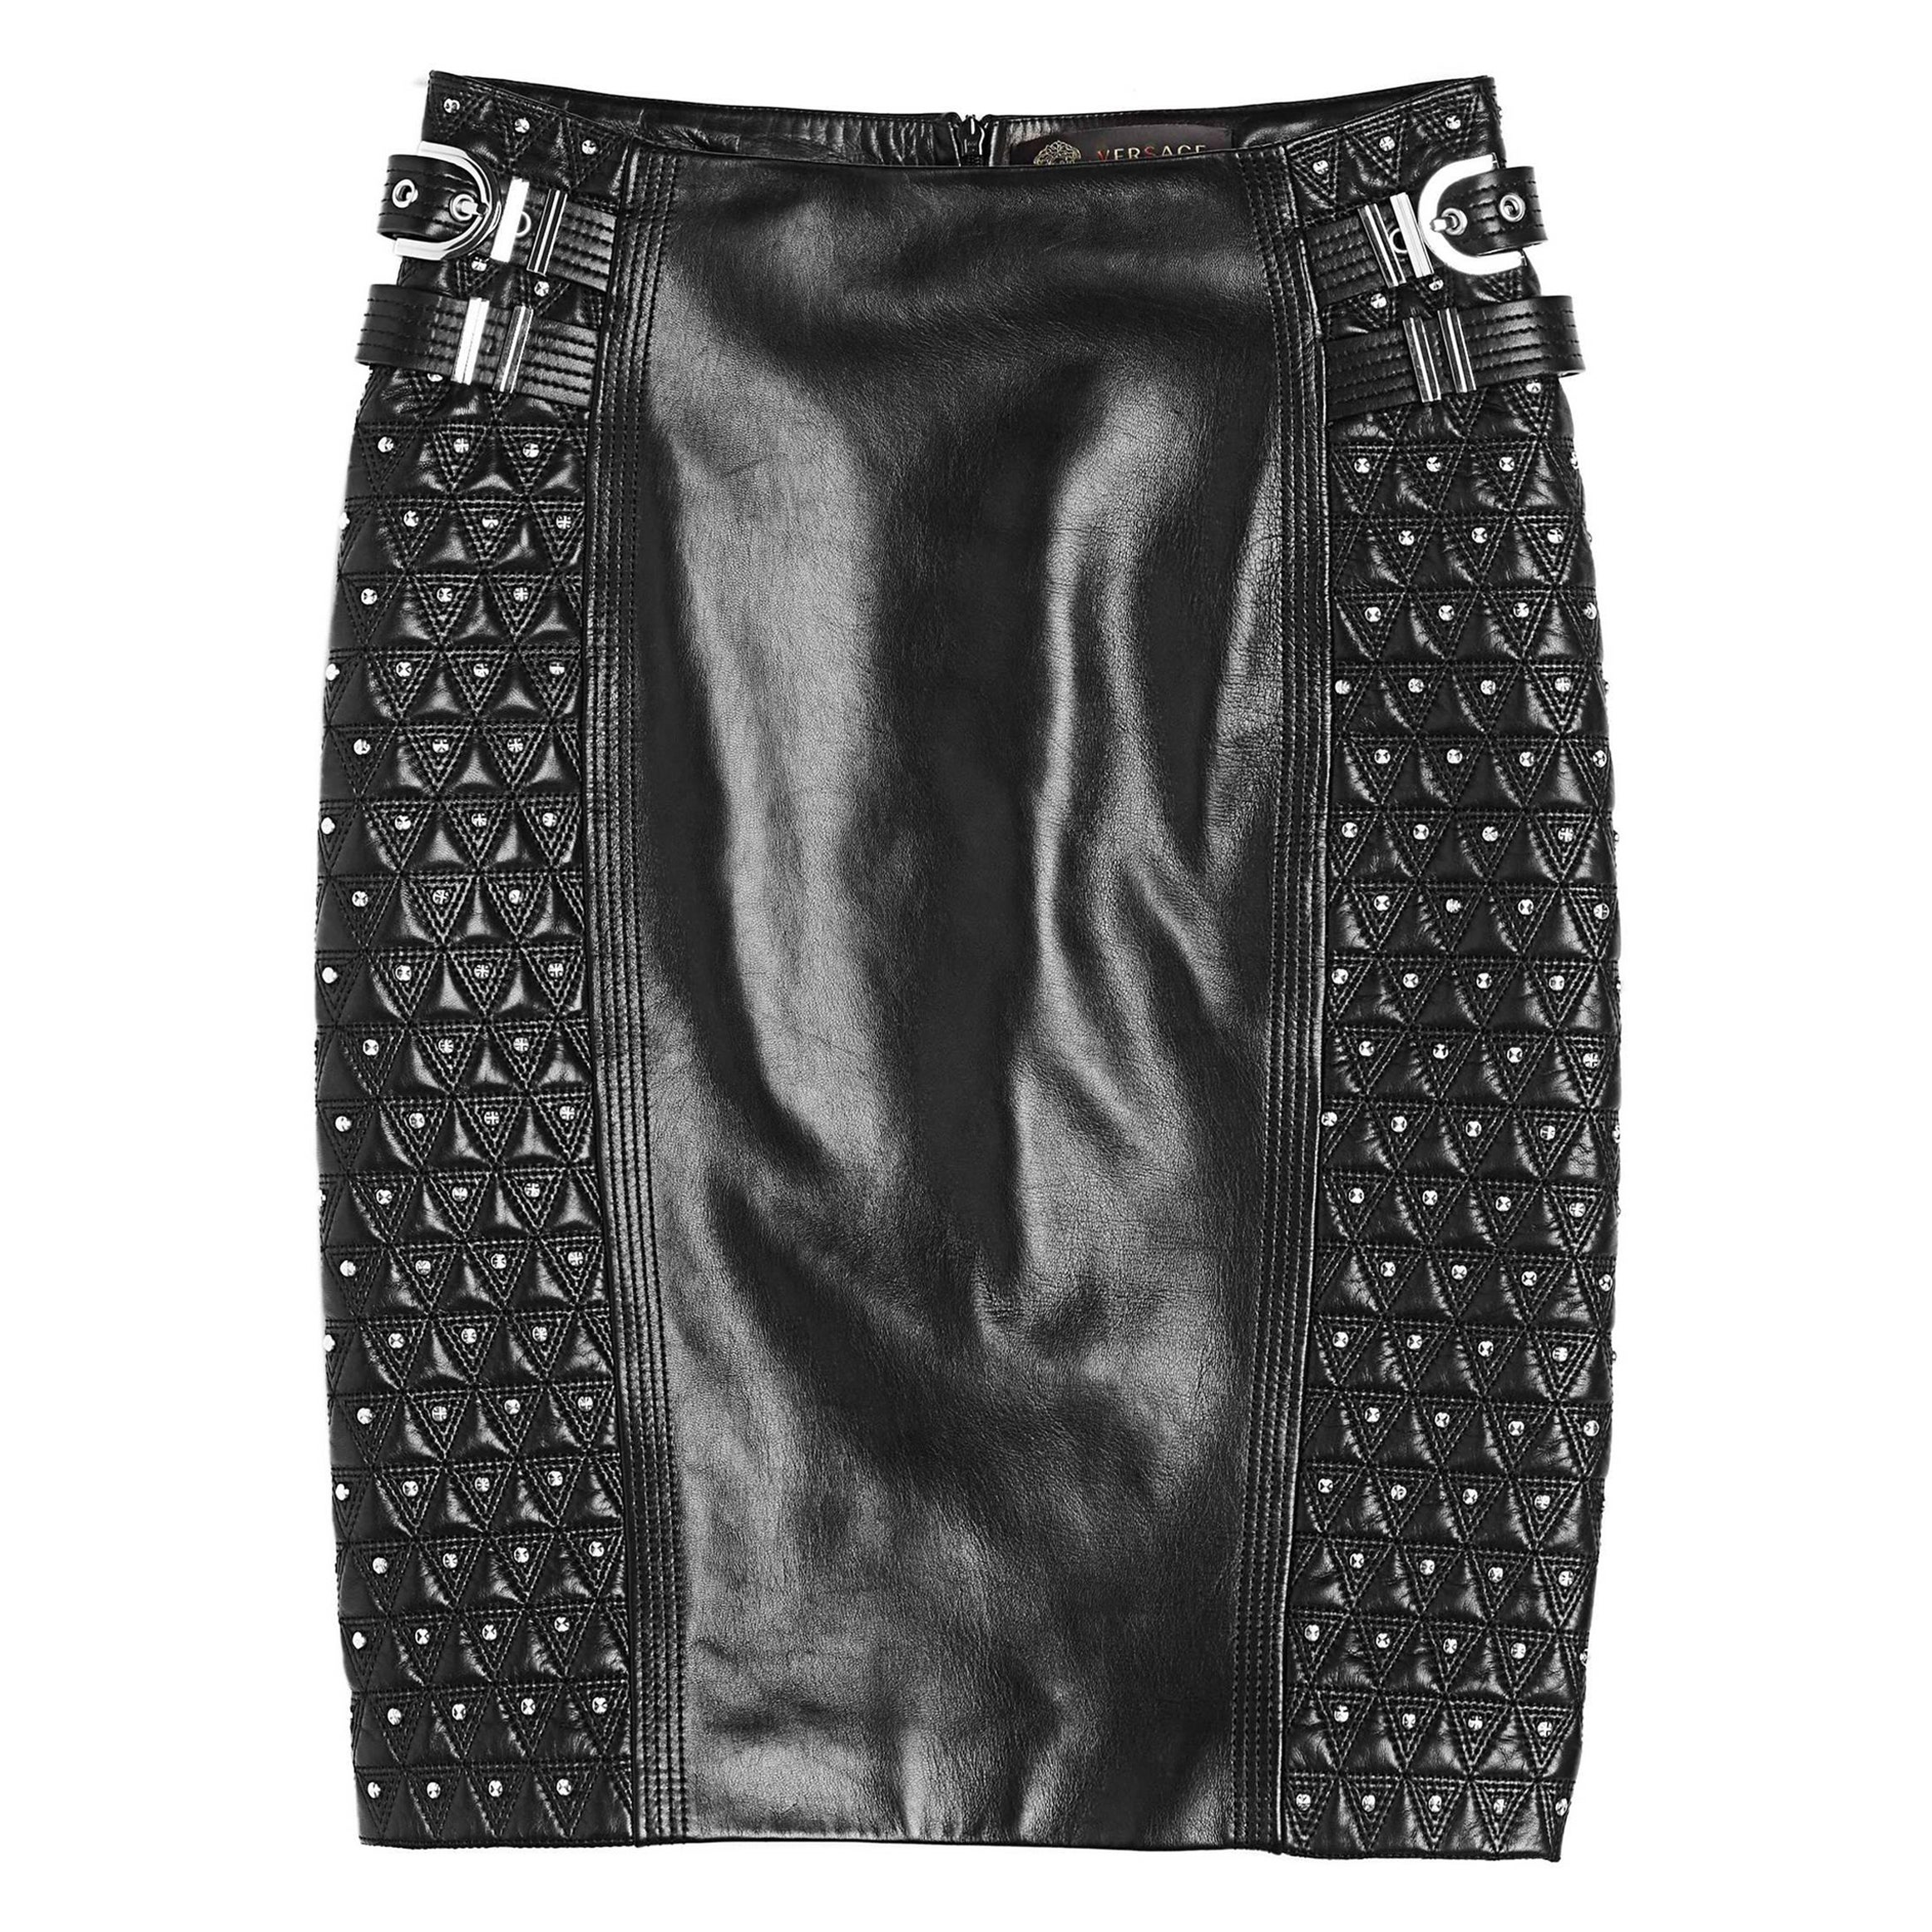 F/W 2013 L# 28 VERSACE STUDDED BLACK LEATHER MOTO PENCIL SKIRT Sz IT 38 and 40  For Sale